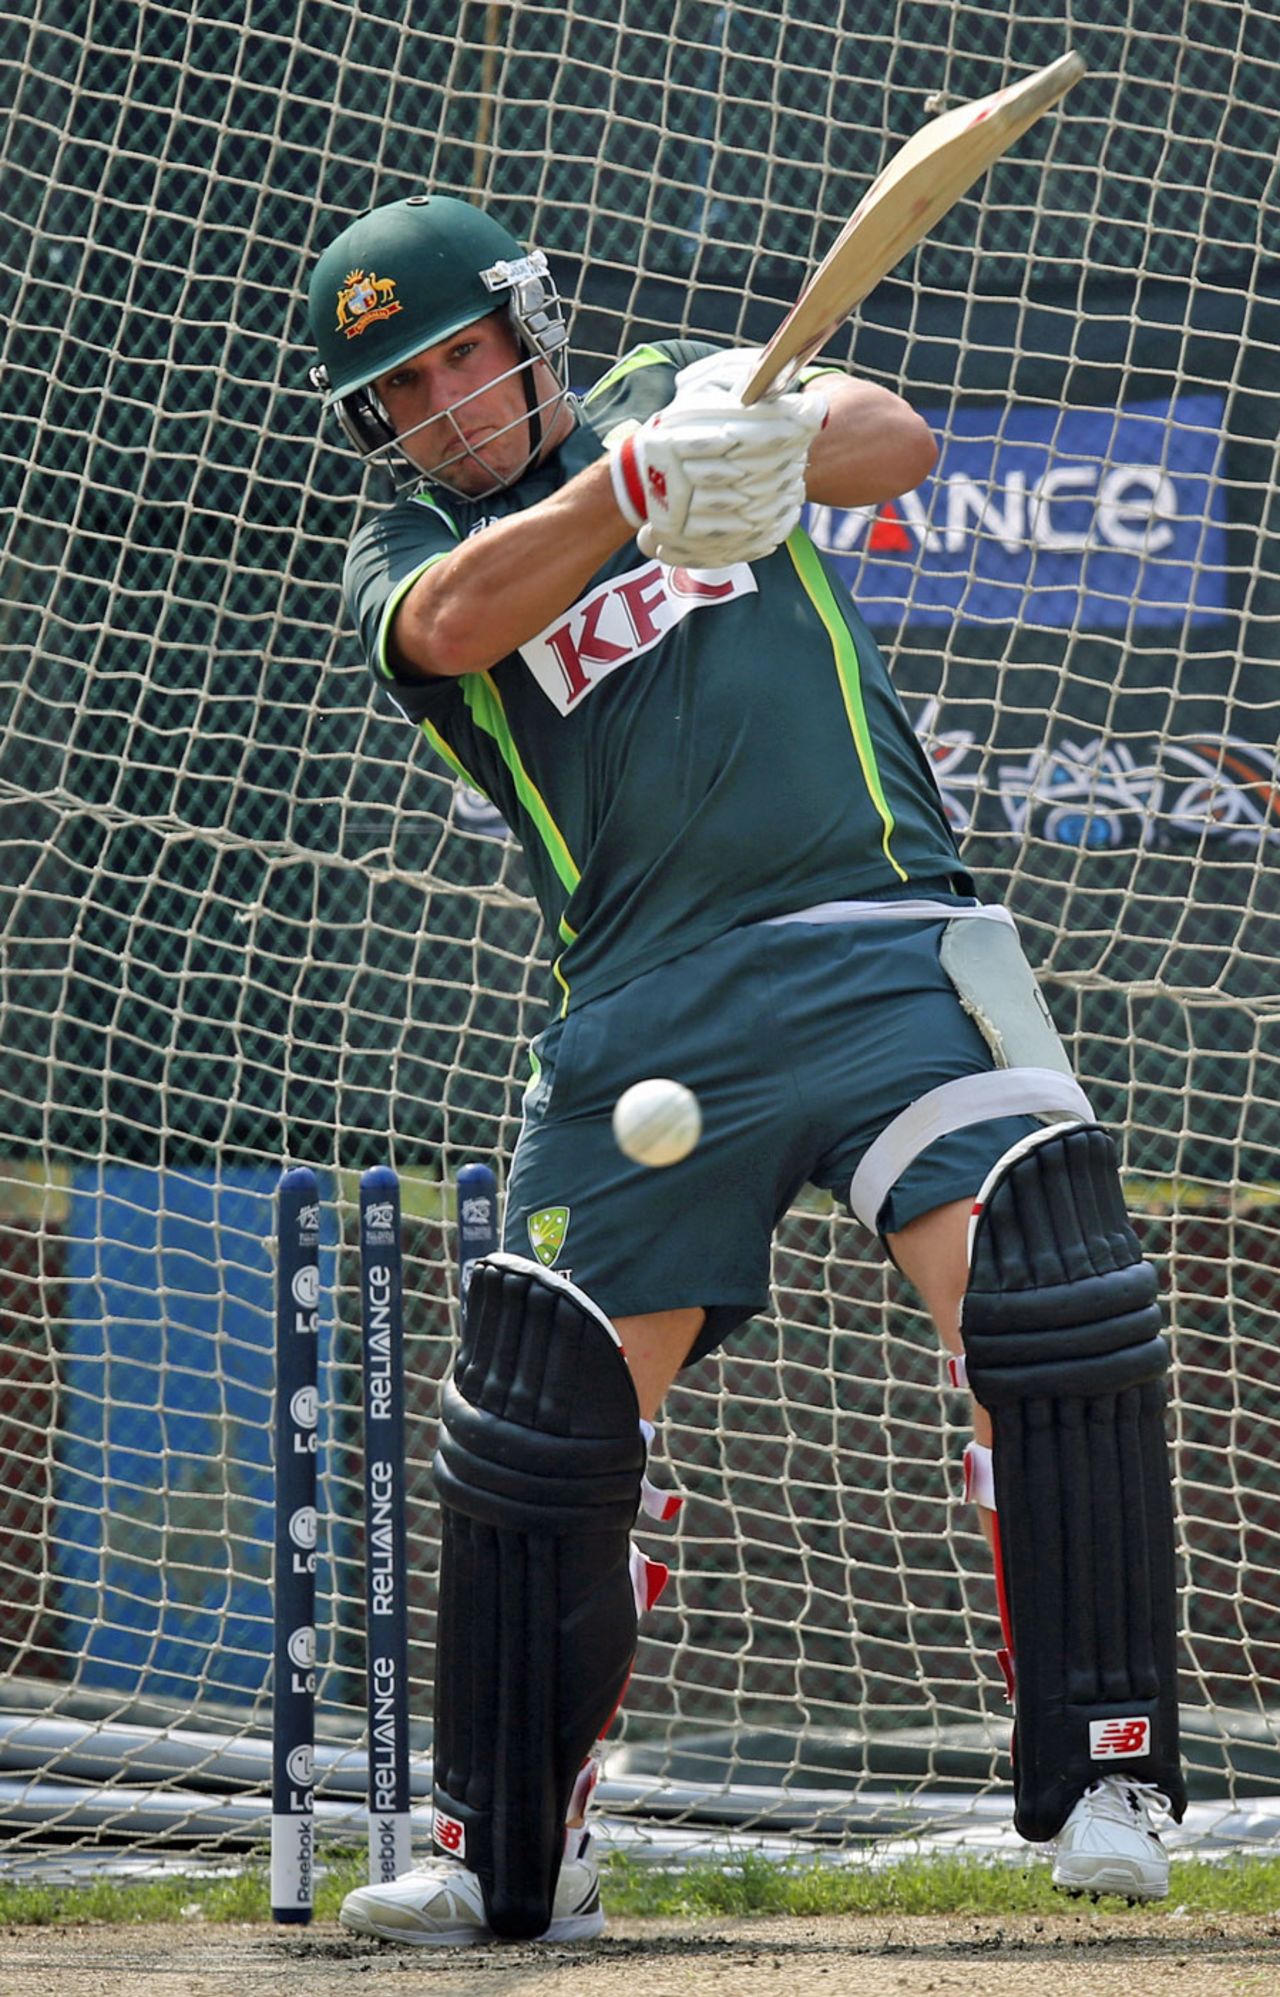 Aaron Finch bats in the nets on the eve of Australia's game against West Indies, Mirpur, March 27, 2014